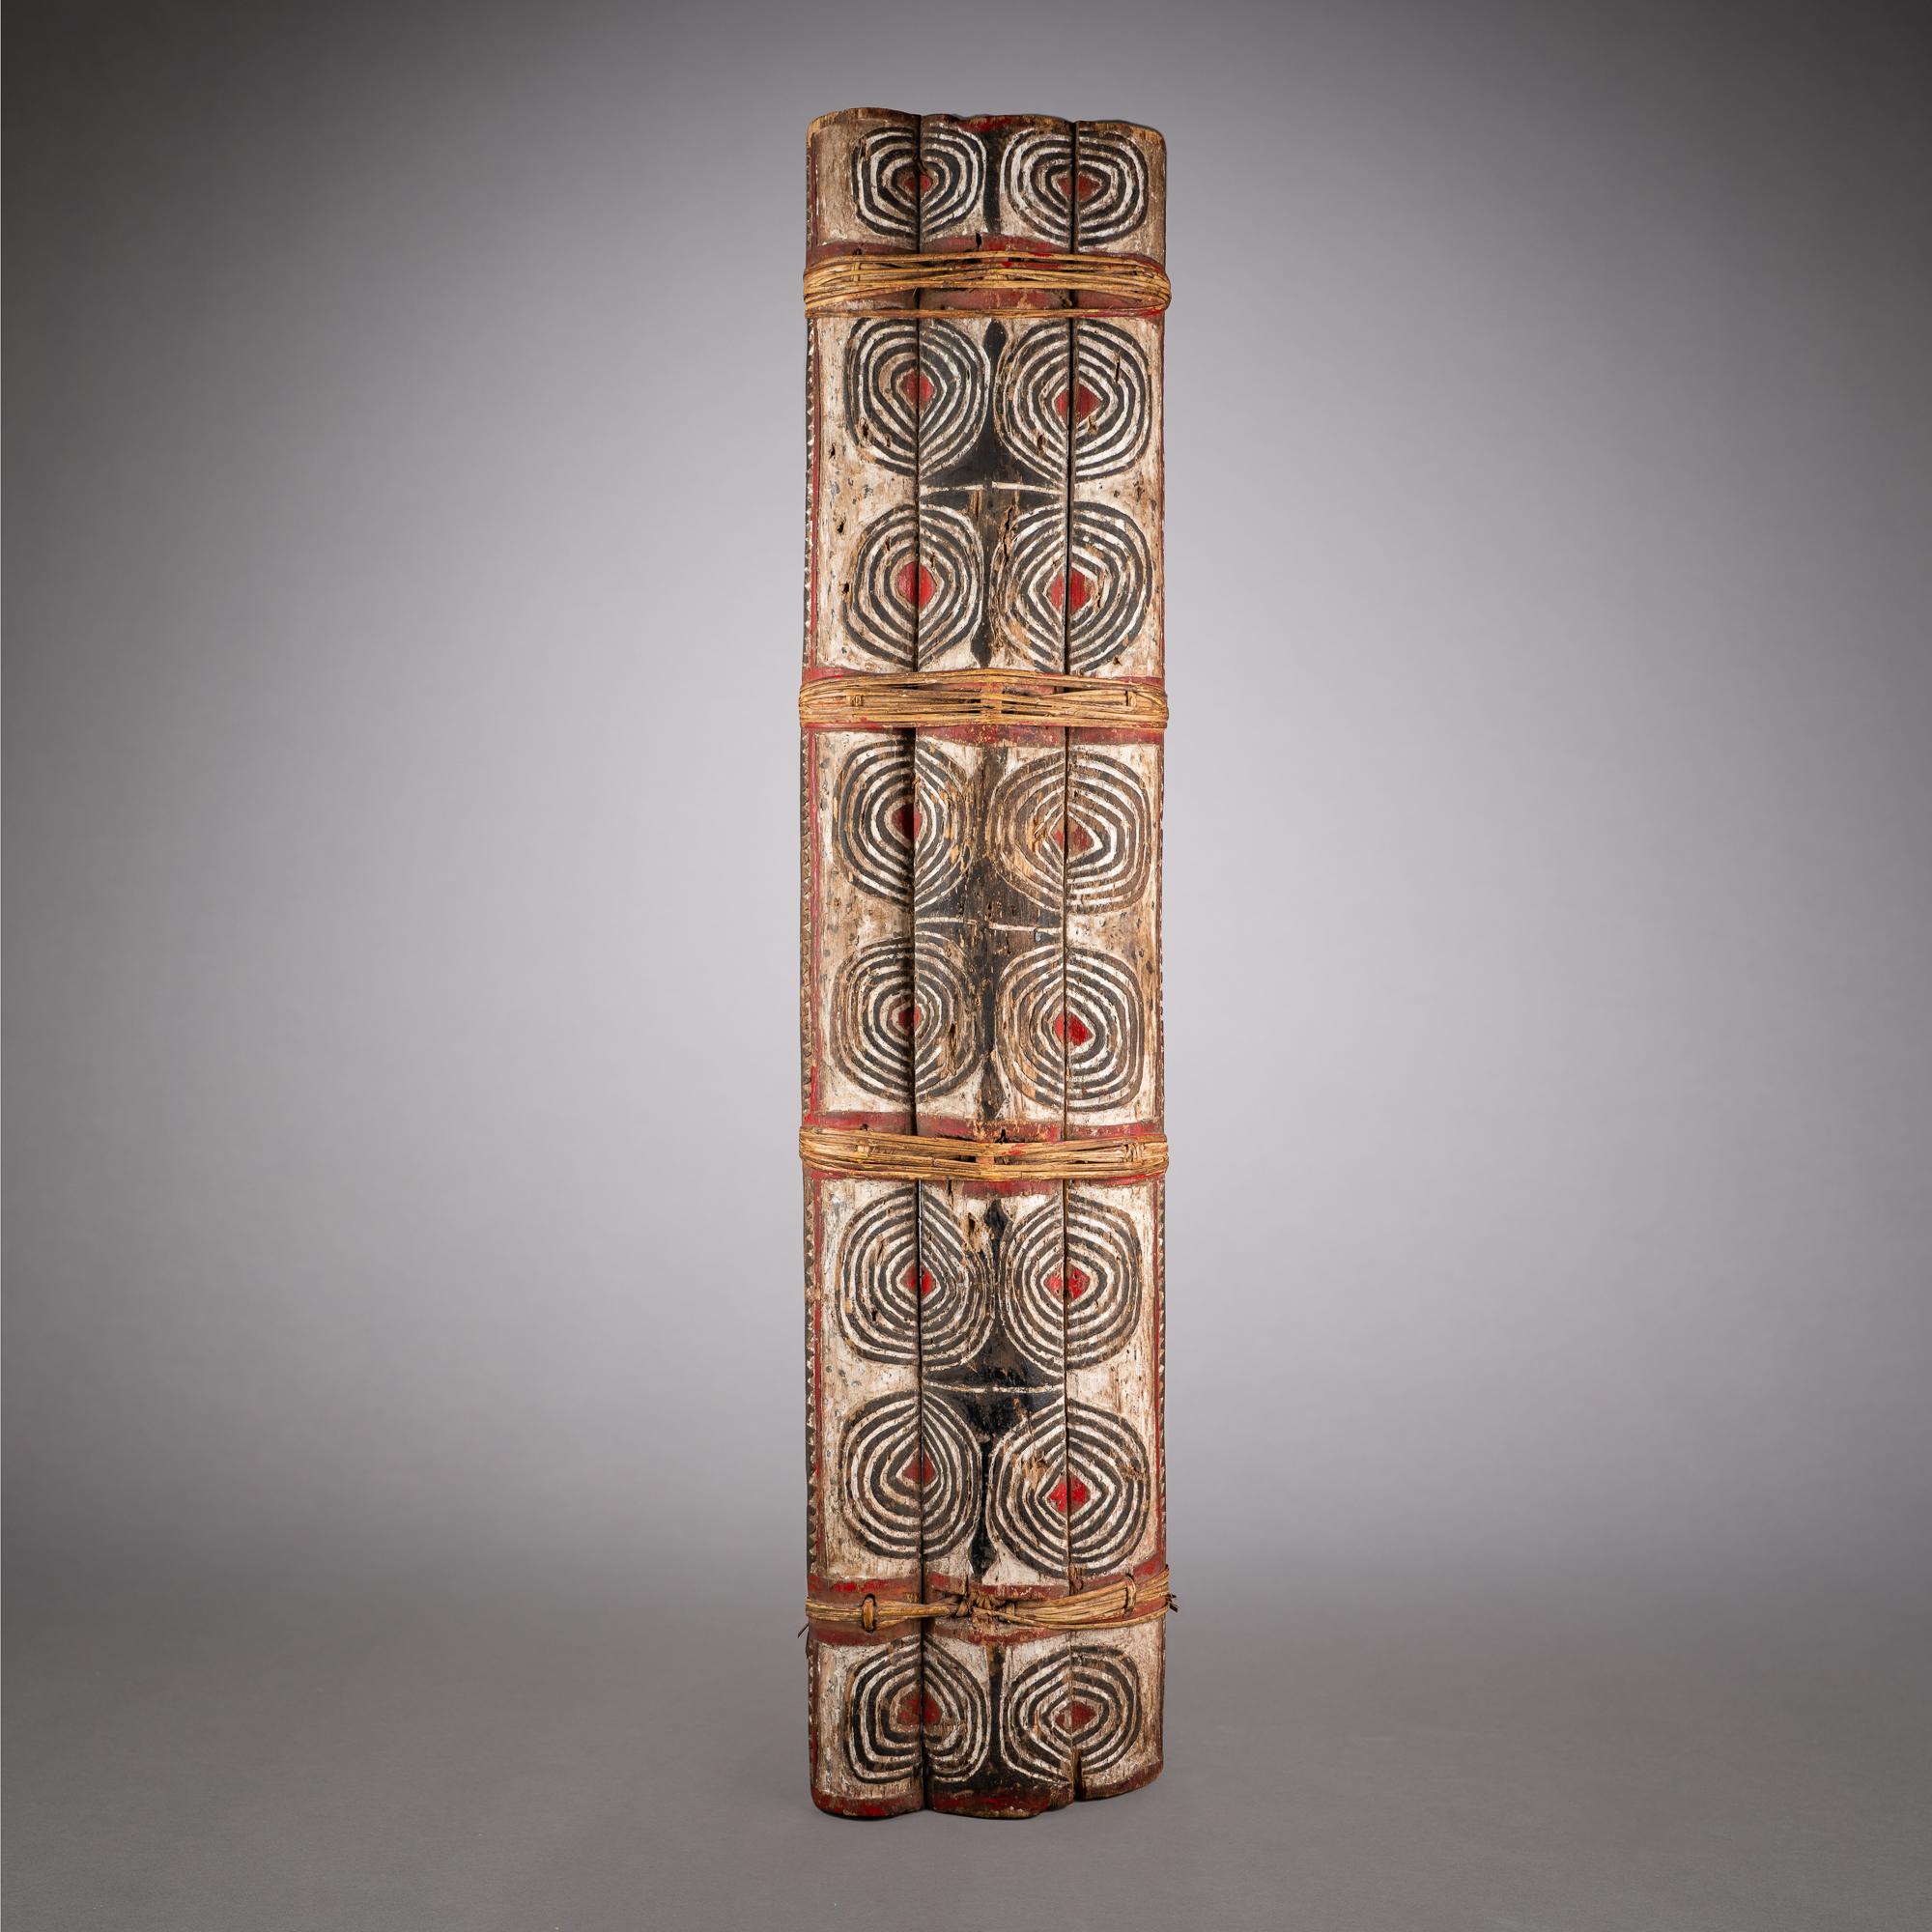 This tall, vertical shield from West New Britain exemplifies classic Kadrian/Arawe design, with panels of concentric circles in pairs and quartets separated by horizontal bands. It is constructed of three planks lashed together with cane, with a